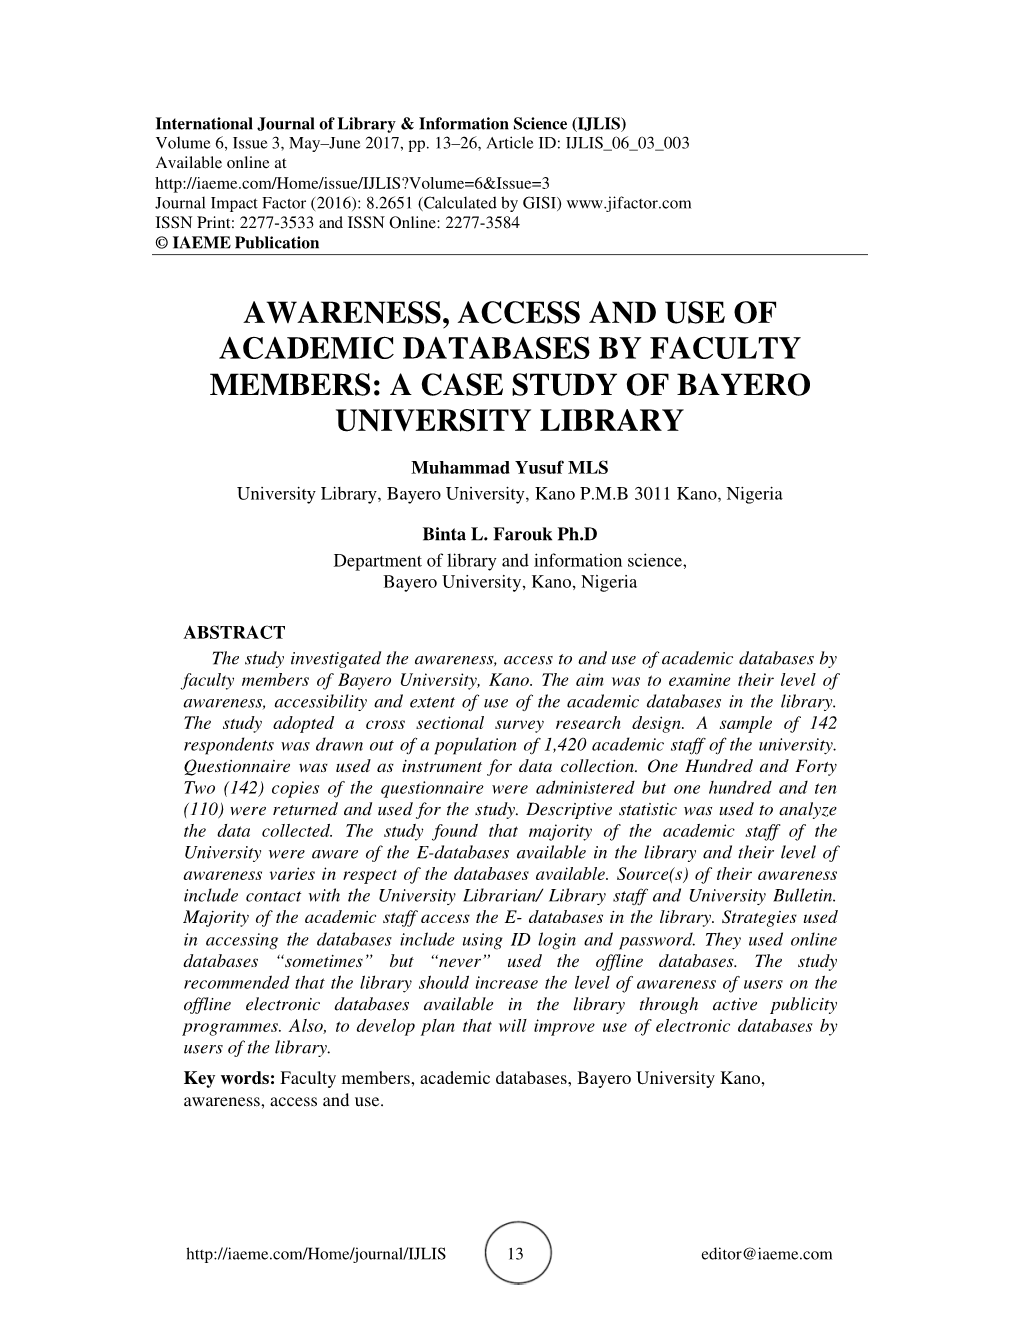 Awareness, Access and Use of Academic Databases by Faculty Members: a Case Study of Bayero University Library